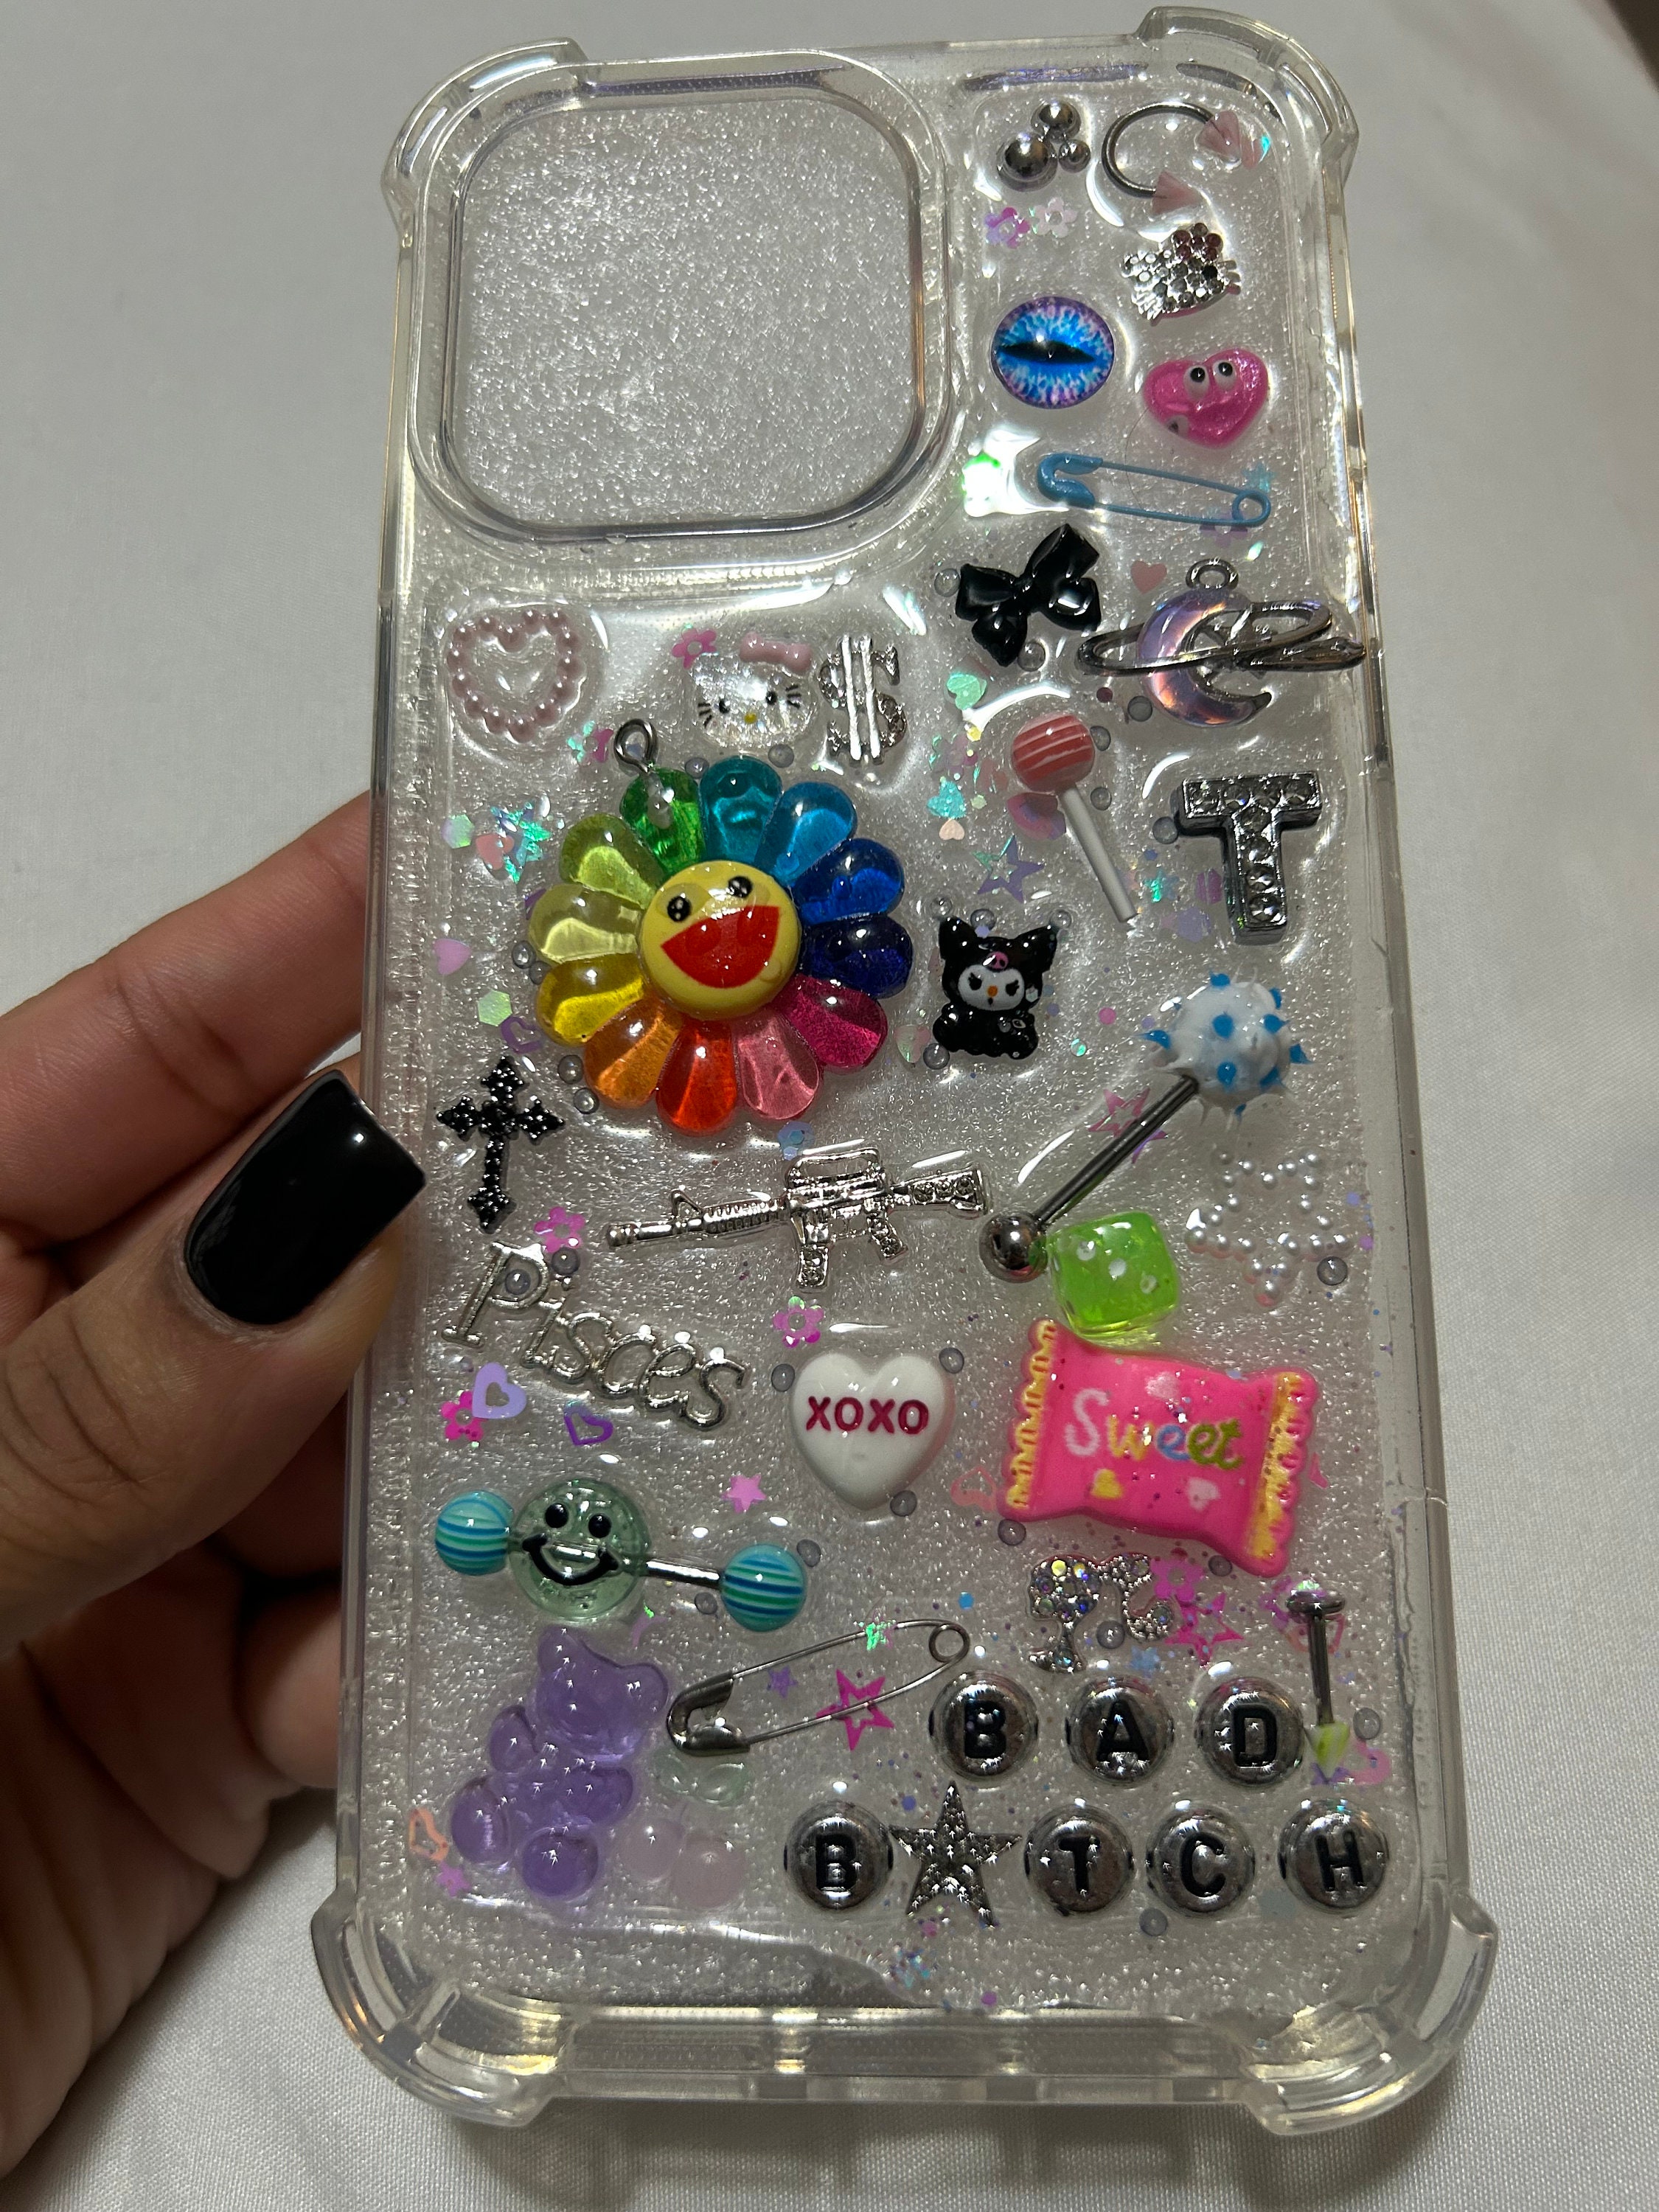 For Samsung Galaxy A14 5G, Bling Glitter Phone Case w/ Tempered Glass &  Lanyard